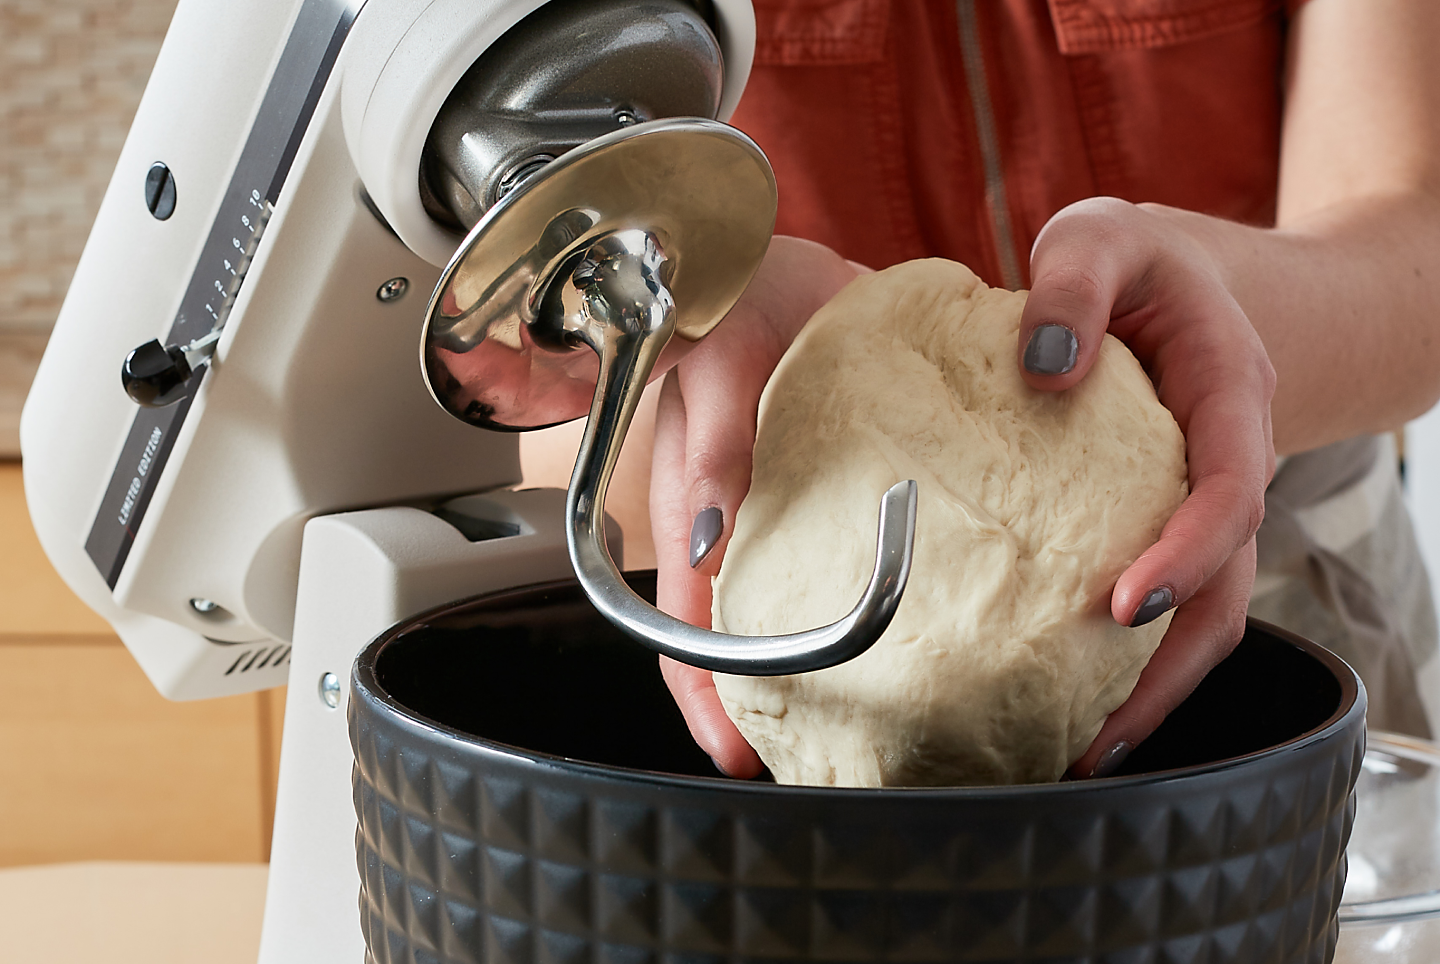 Woman removing a ball of dough from a KitchenAid® stand mixer